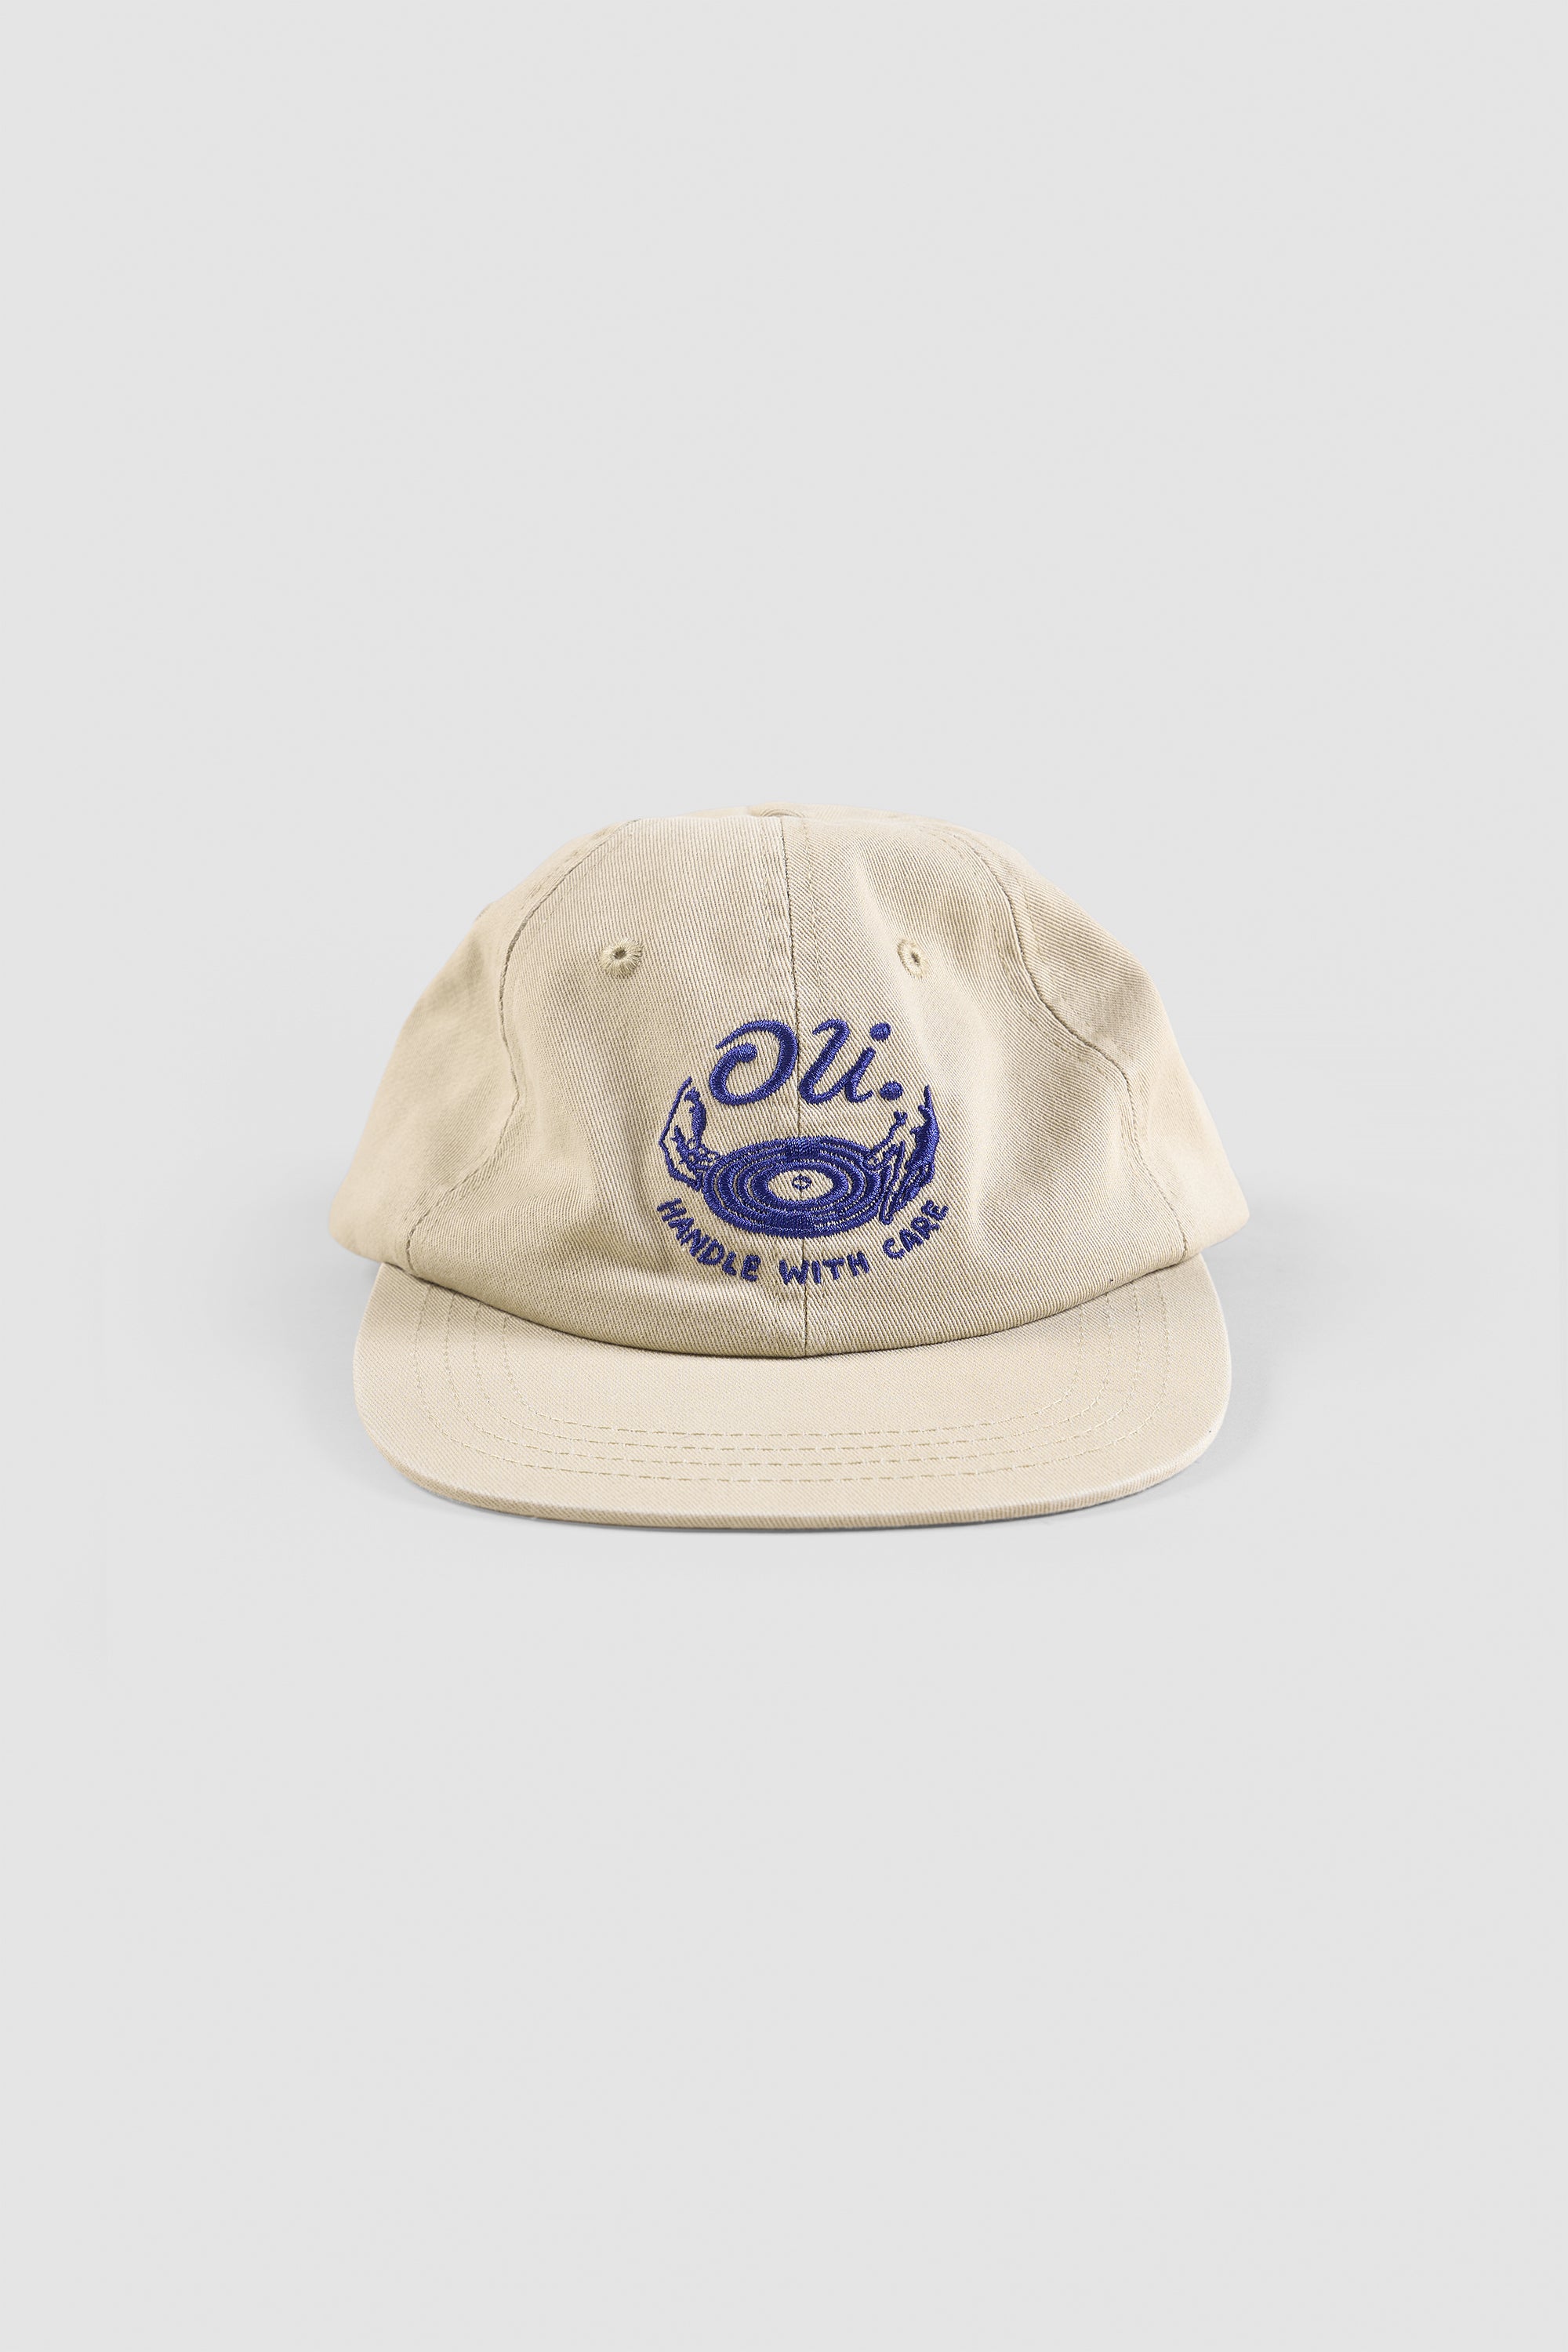 Handle With Care Cap - Limestone